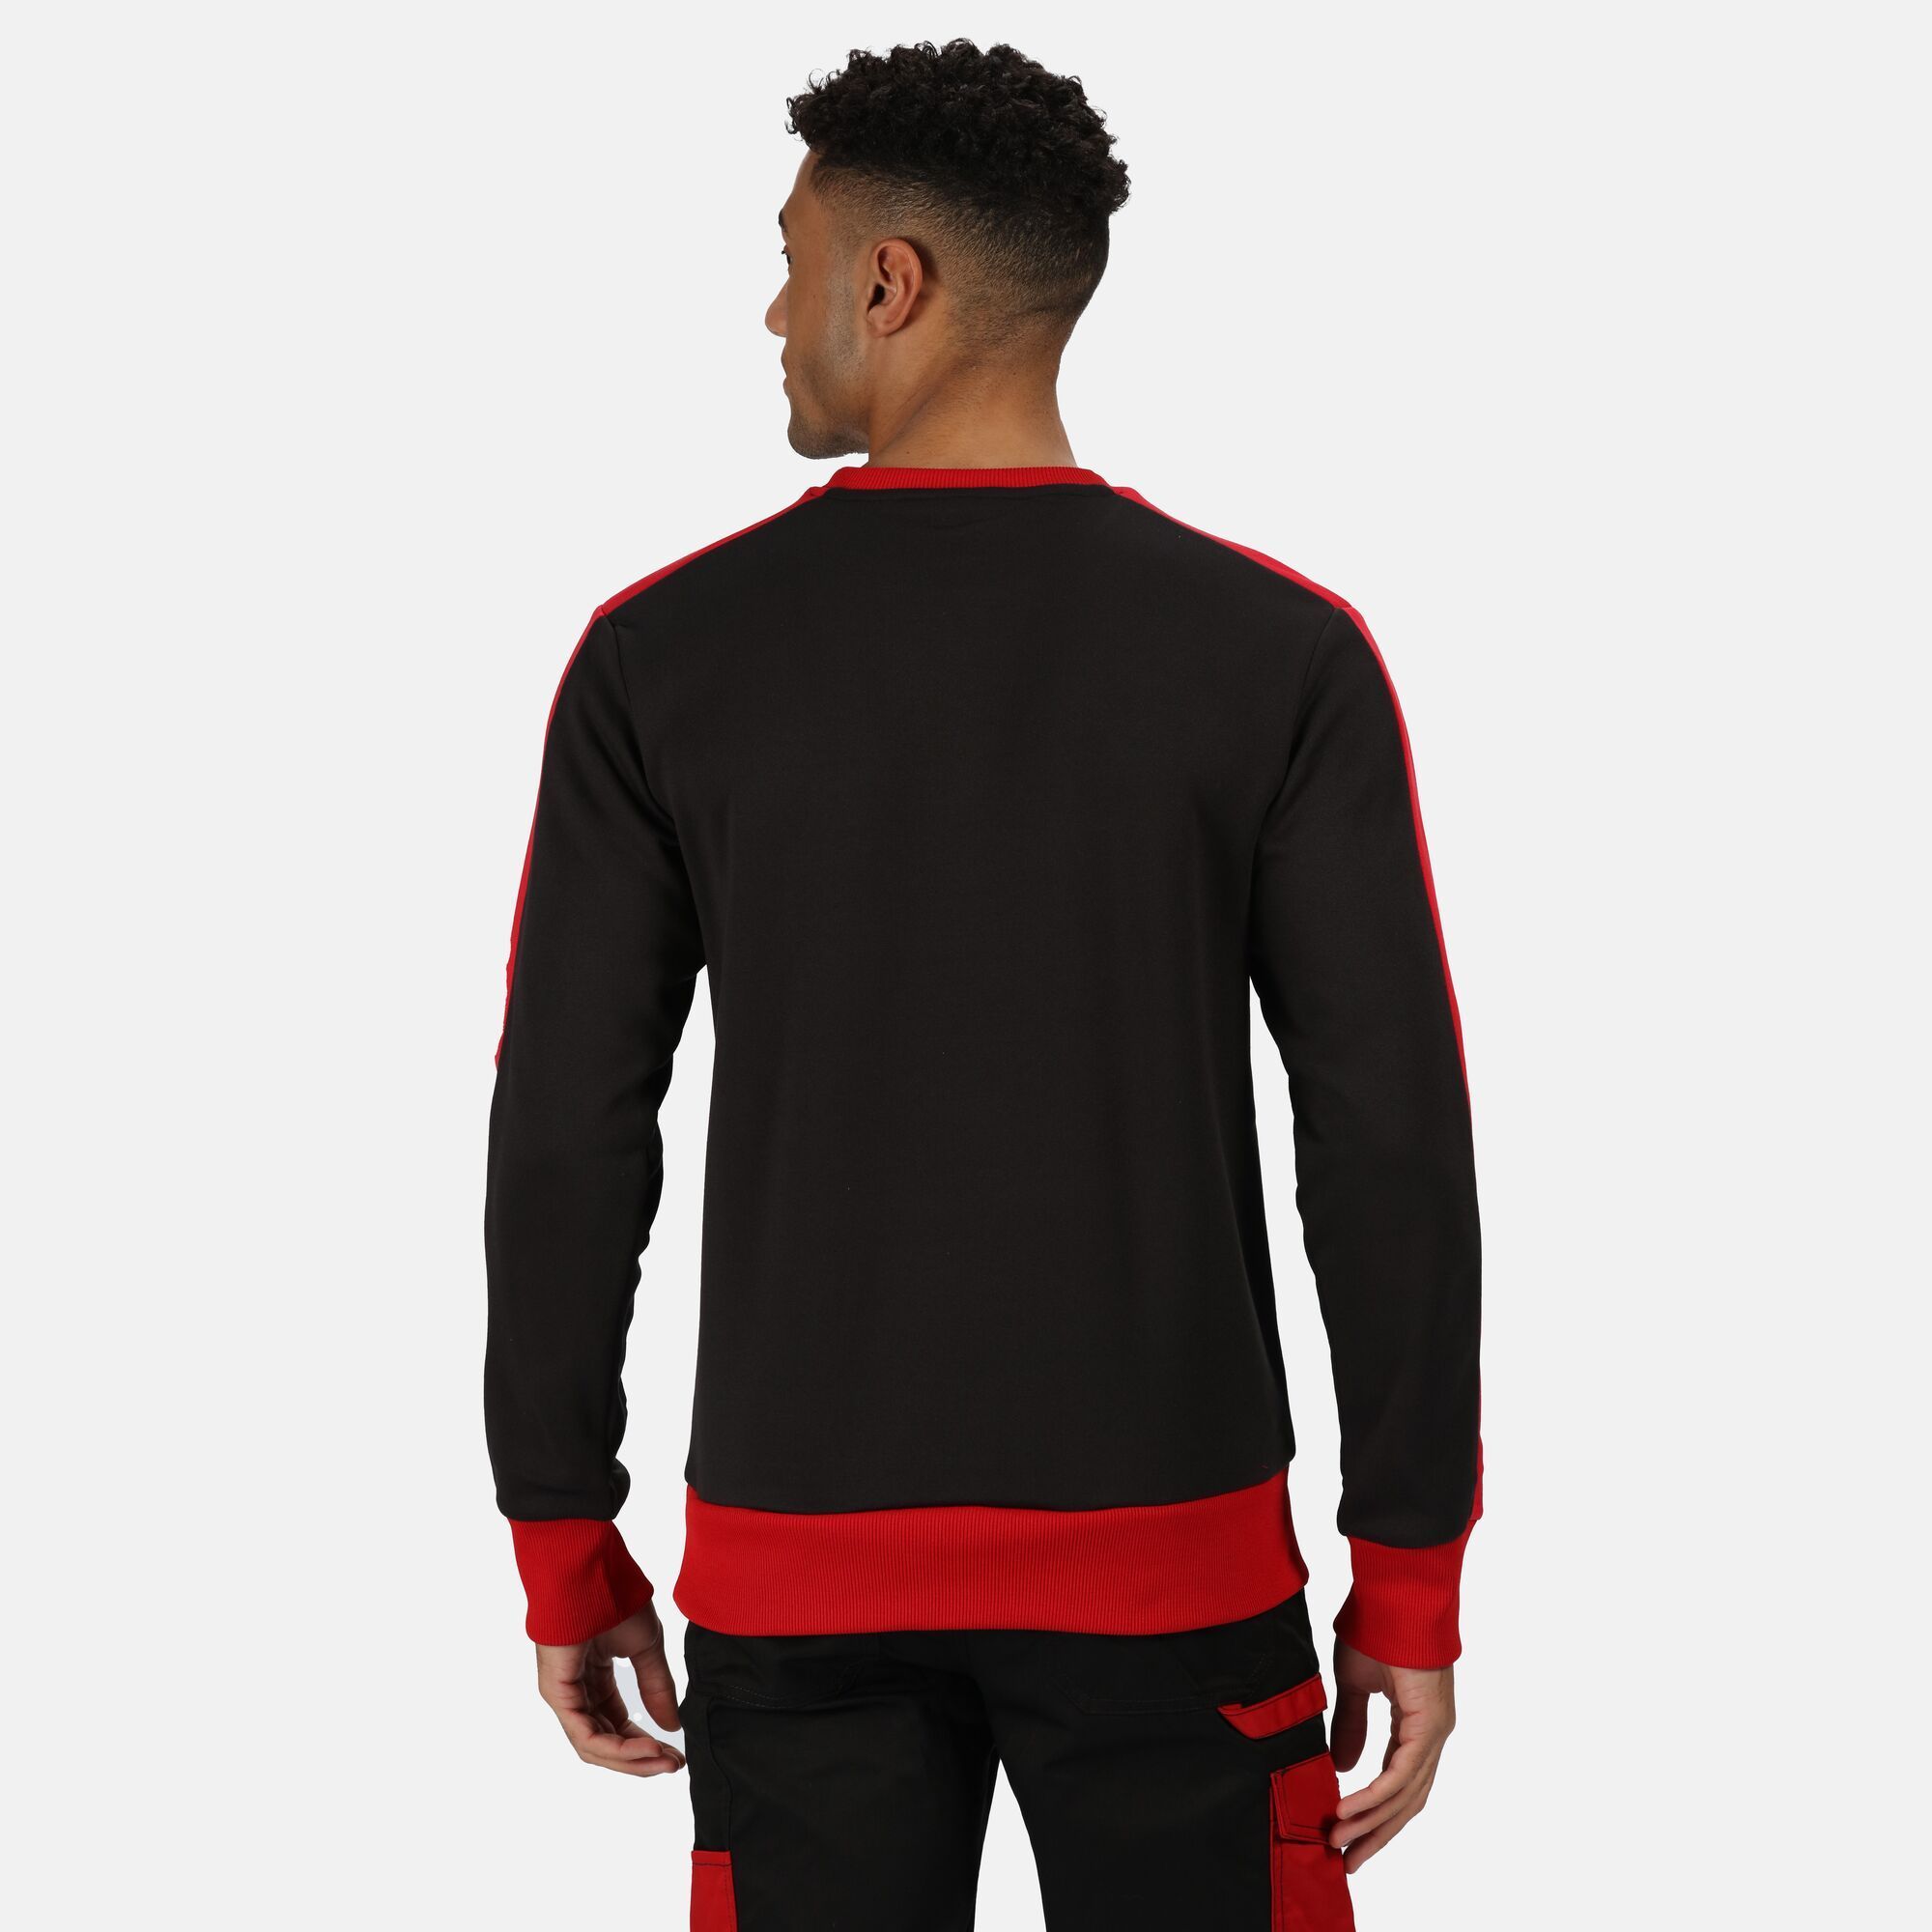 100% brushed back polyester. Quick drying. Ribbed collar, hem and cuffs. Double layer shoulder panels for extra wear and comfort. No external logo branding.